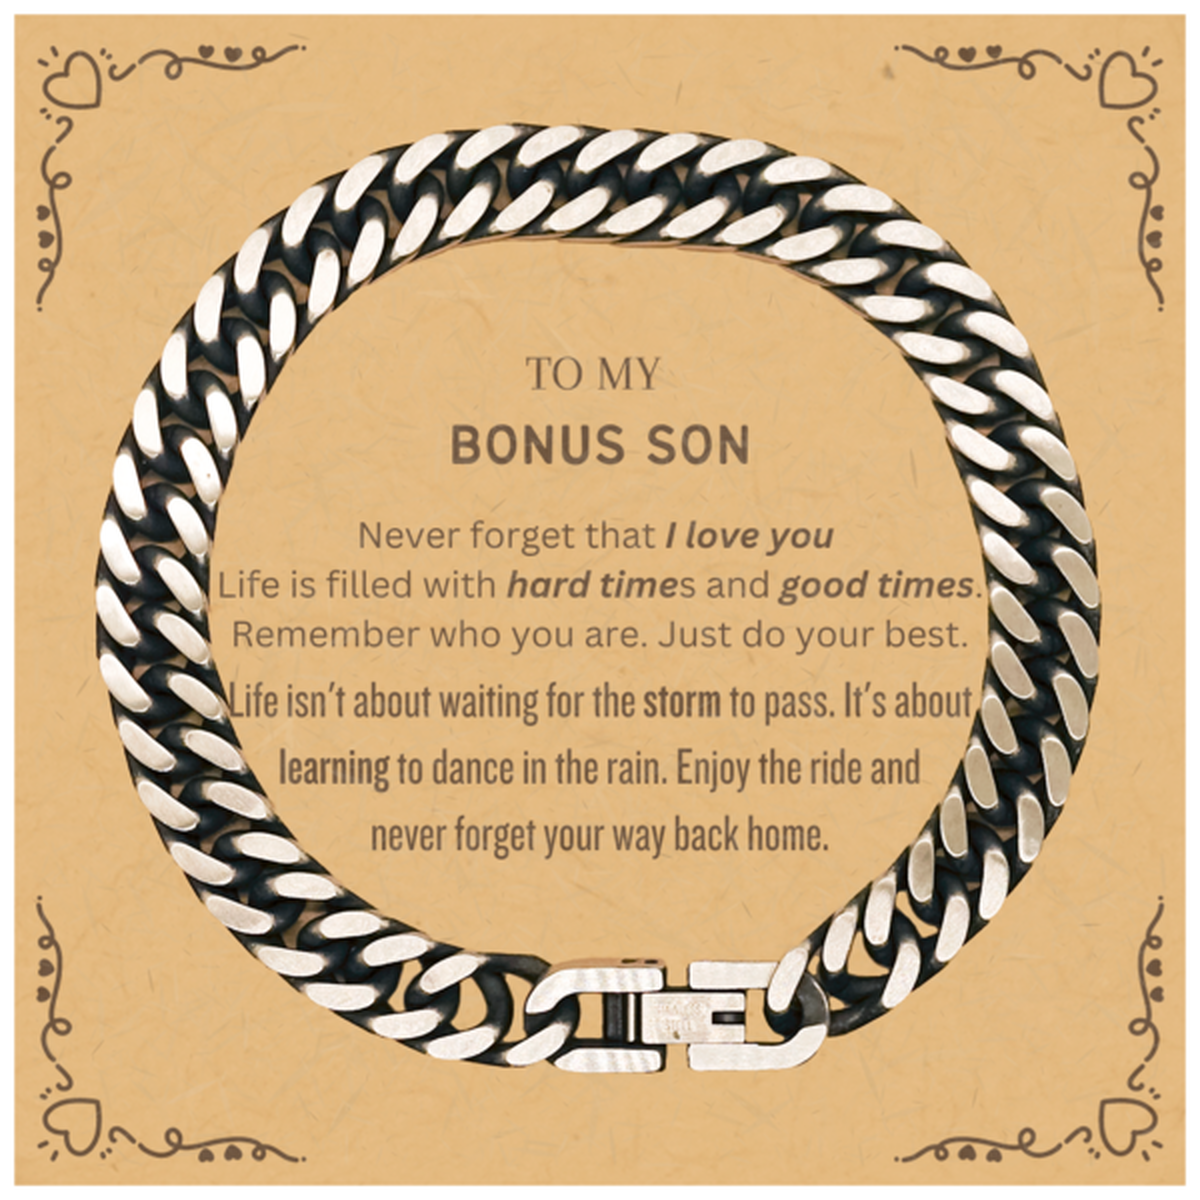 Christmas Bonus Son Cuban Link Chain Bracelet Gifts, To My Bonus Son Birthday Thank You Gifts For Bonus Son, Graduation Unique Gifts For Bonus Son To My Bonus Son Never forget that I love you life is filled with hard times and good times. Remember who you